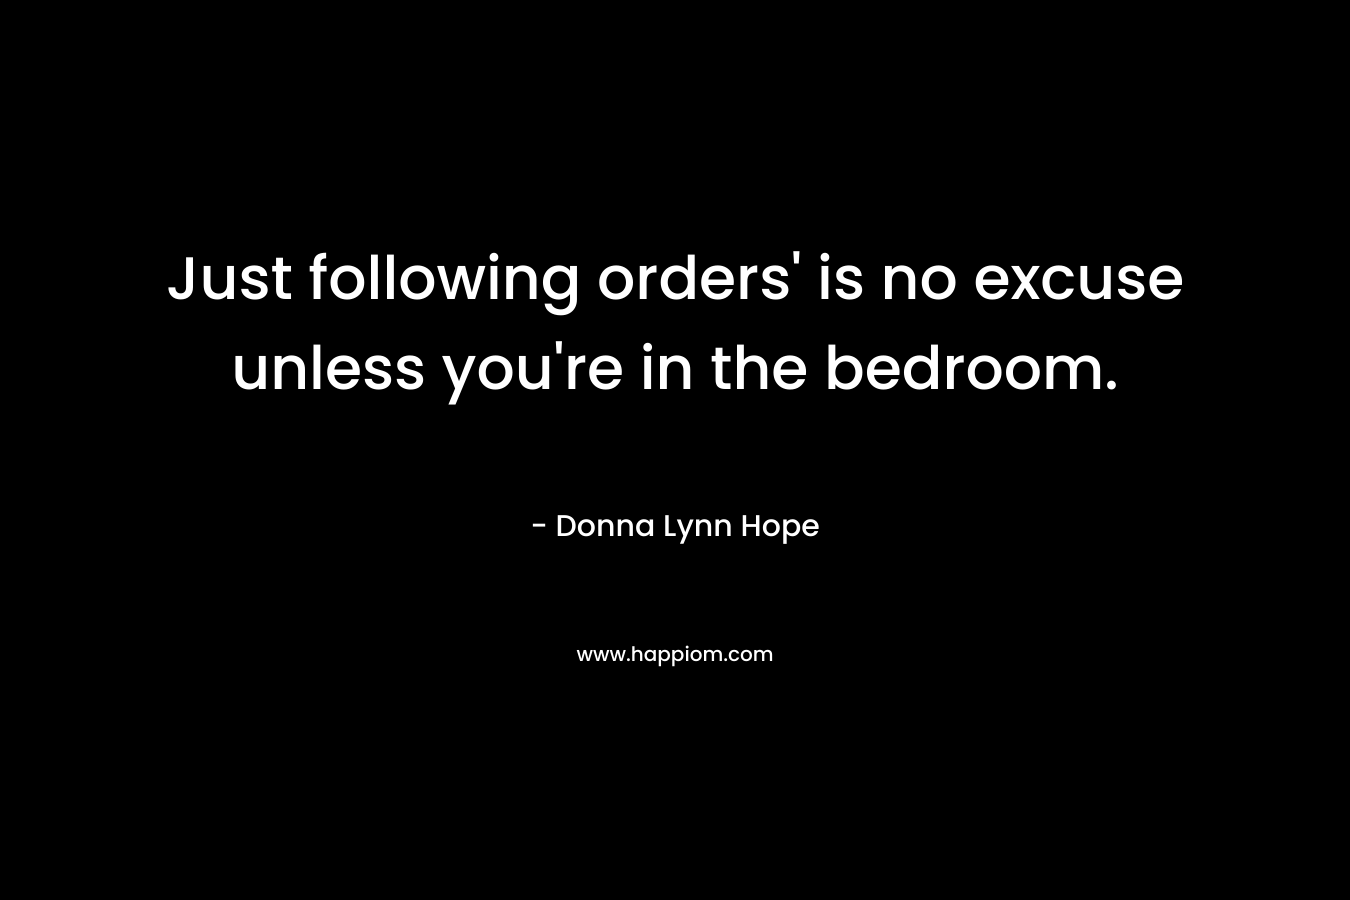 Just following orders' is no excuse unless you're in the bedroom.